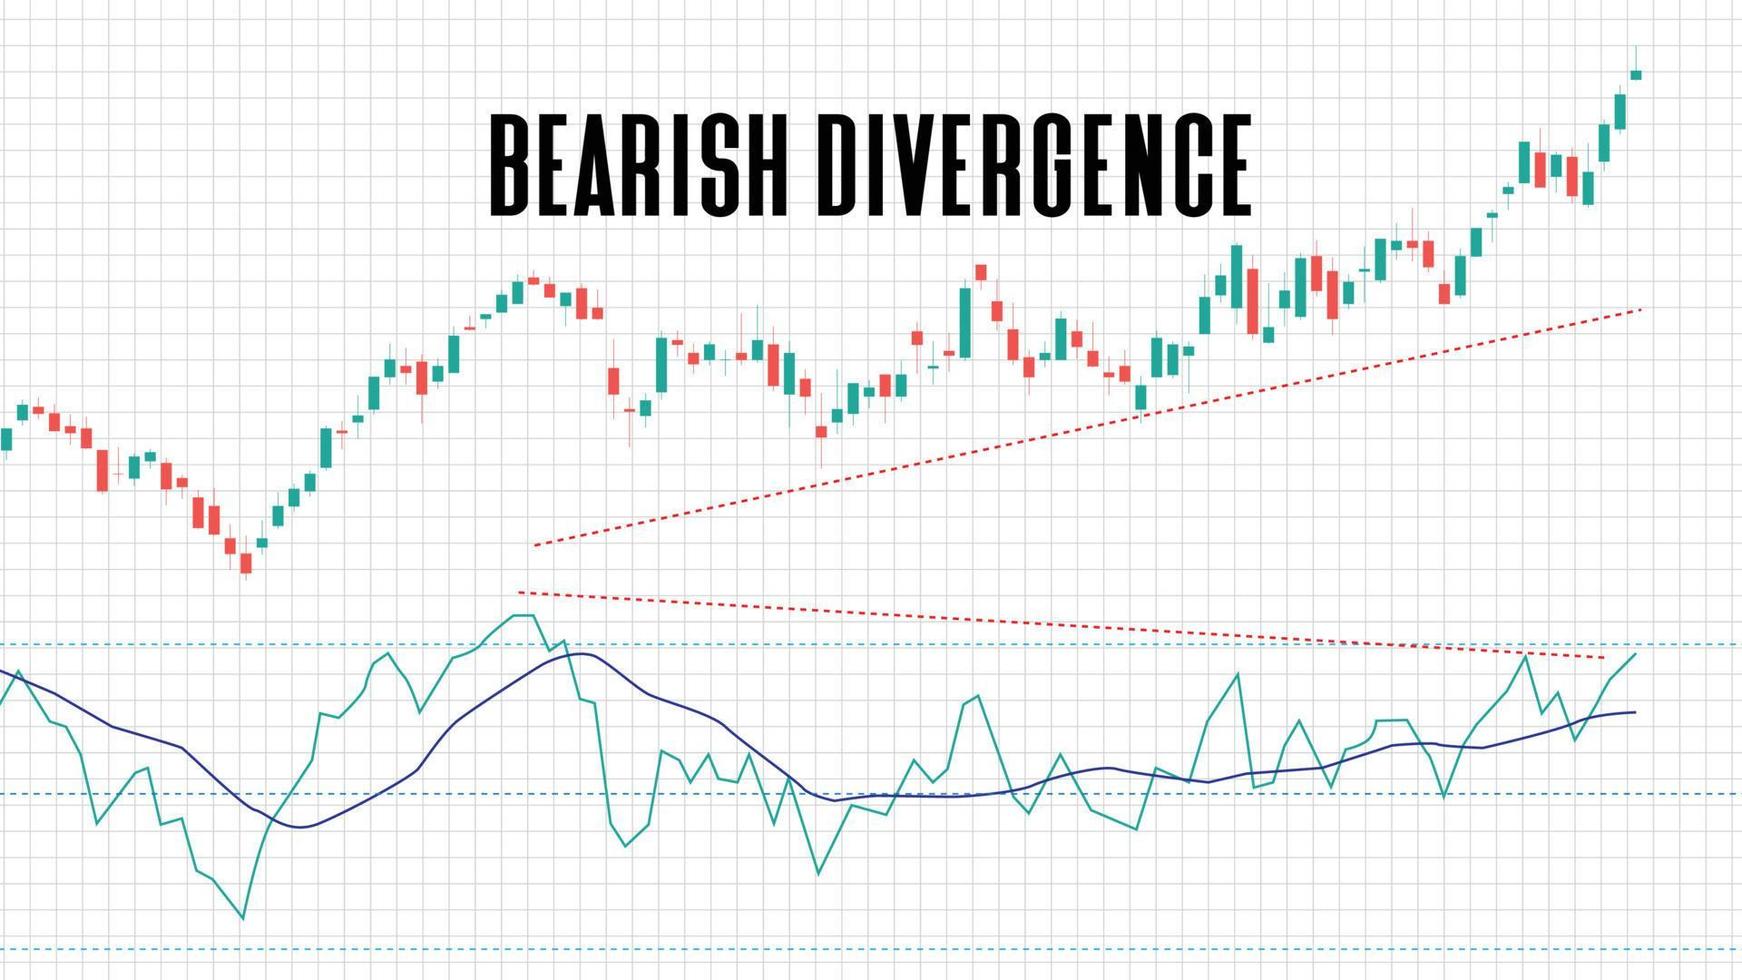 abstract background of bearish divergence stock market on white background vector